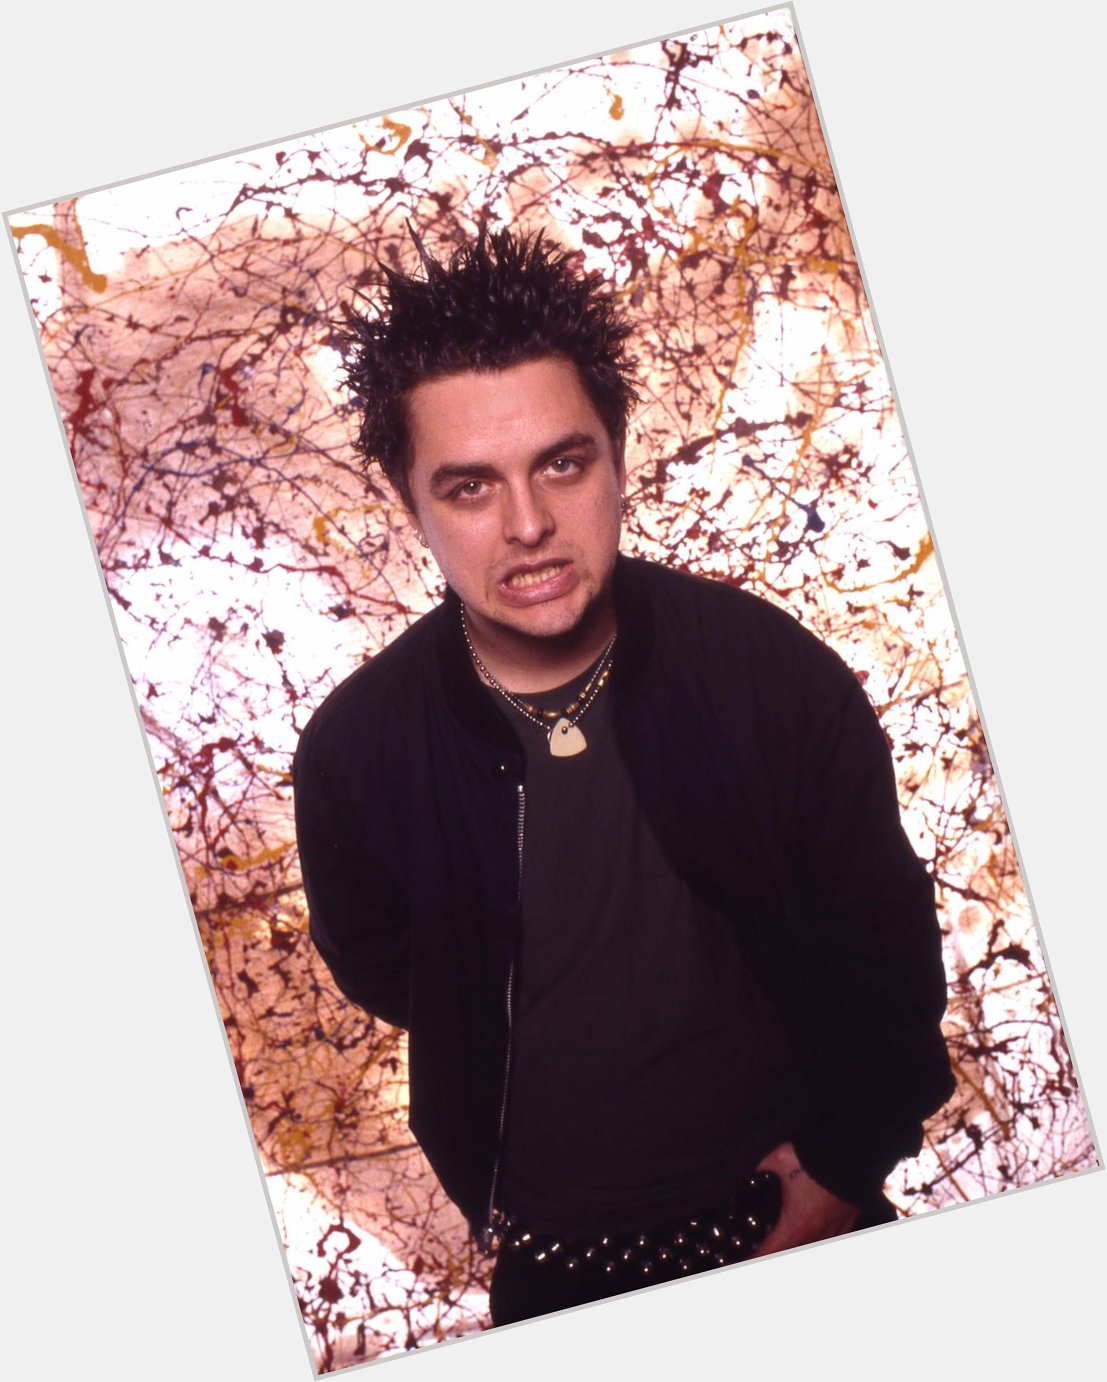 Happy birthday, Billie Joe Armstrong The rocker turns 50 today.

What\s your favorite Green Day song? 